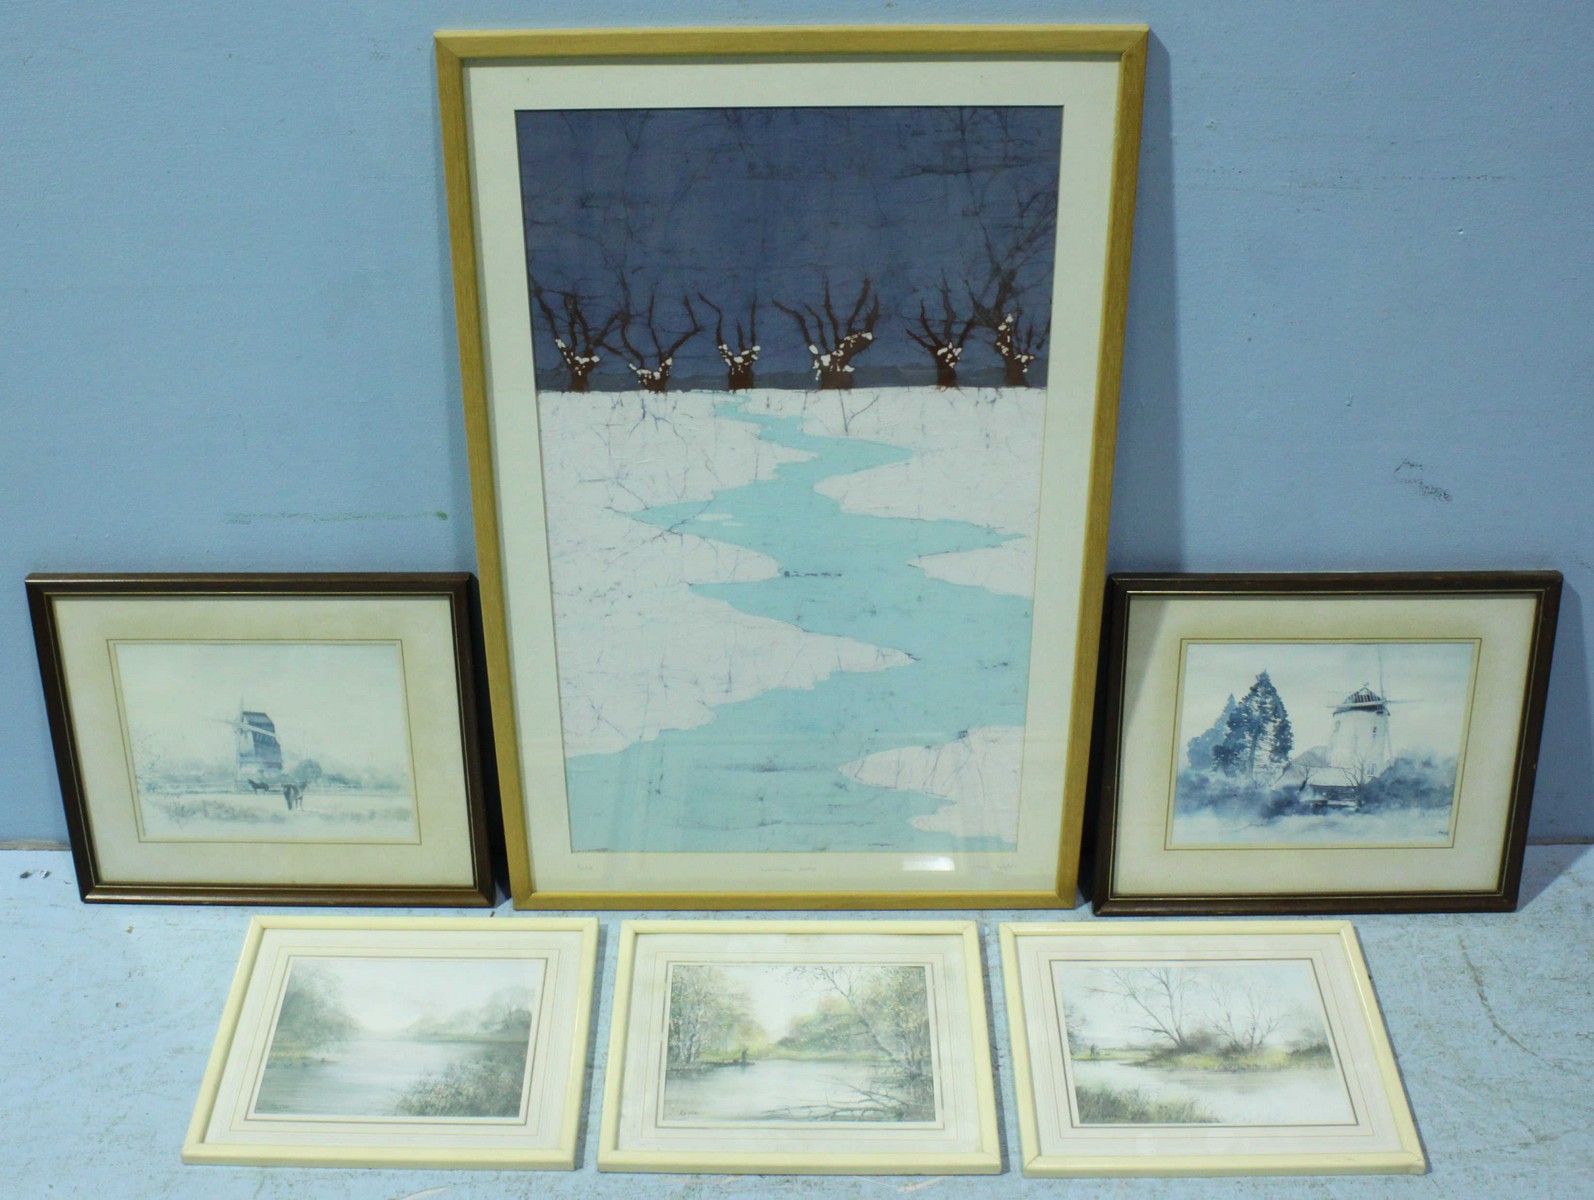 Sian Hughes, 20thC British, 'Grantchester Winter', signed, dated and titled in pencil, mounted,